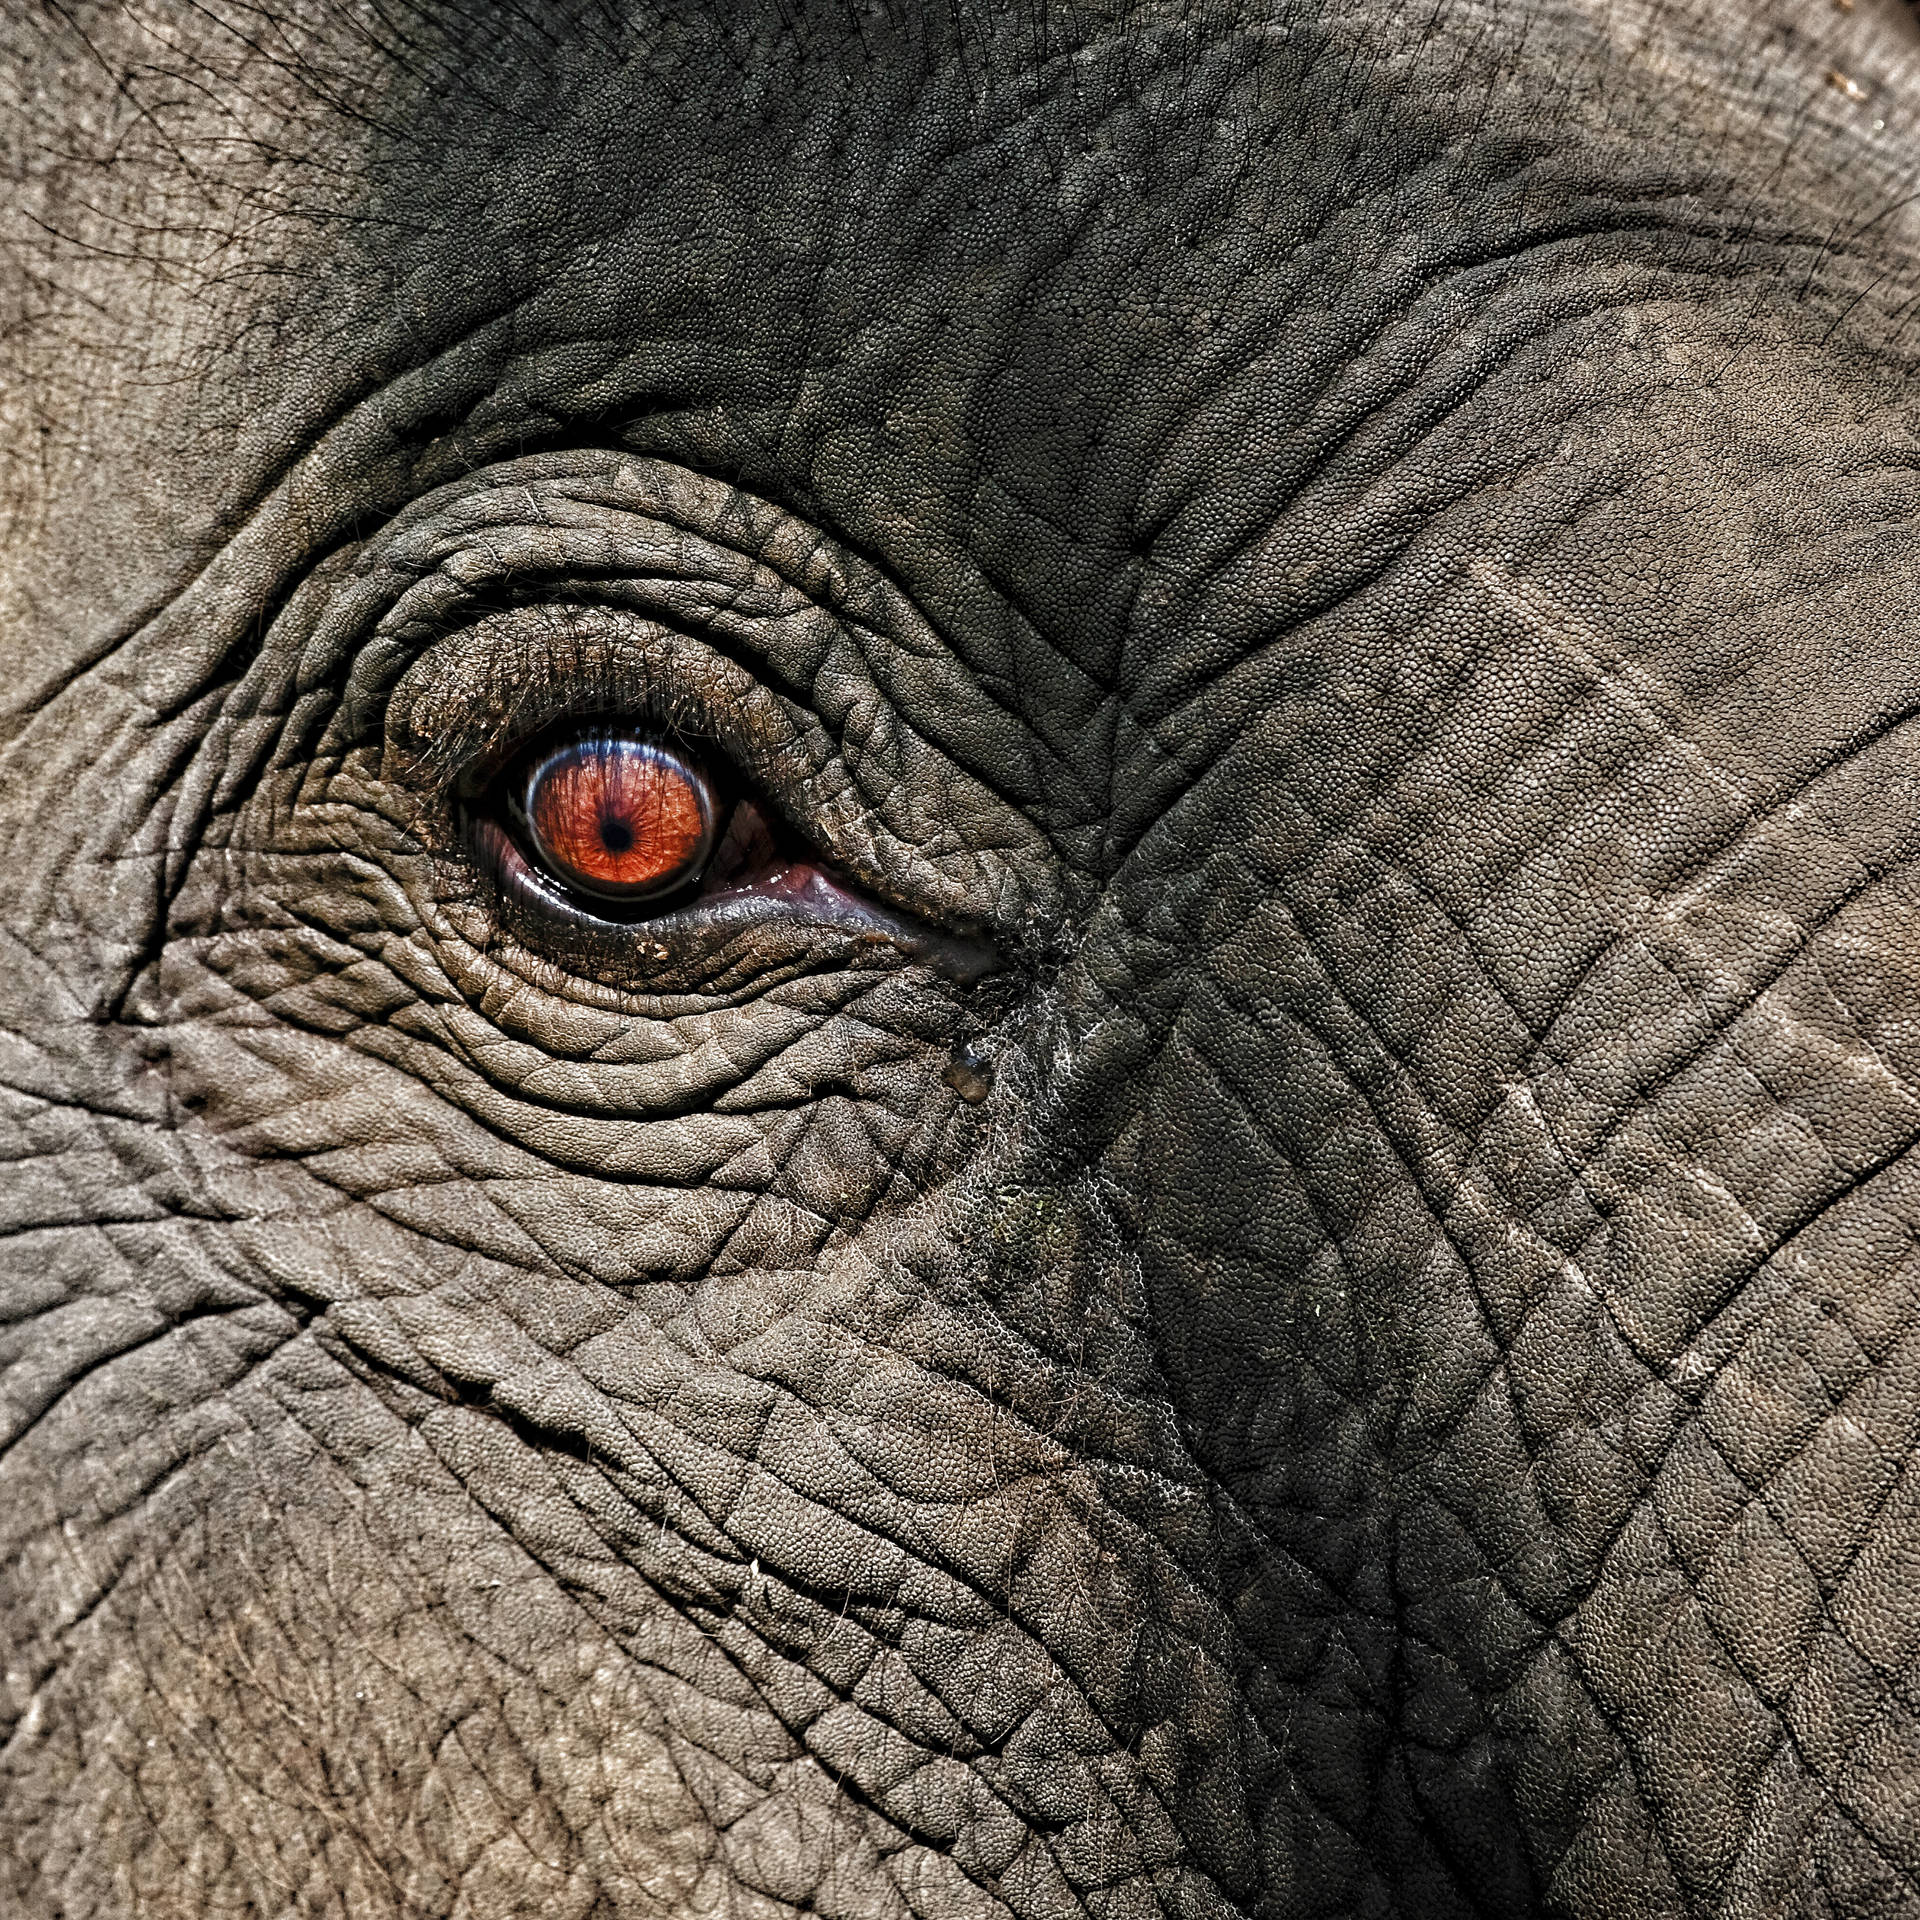 4001X4000 Elephant Wallpaper and Background